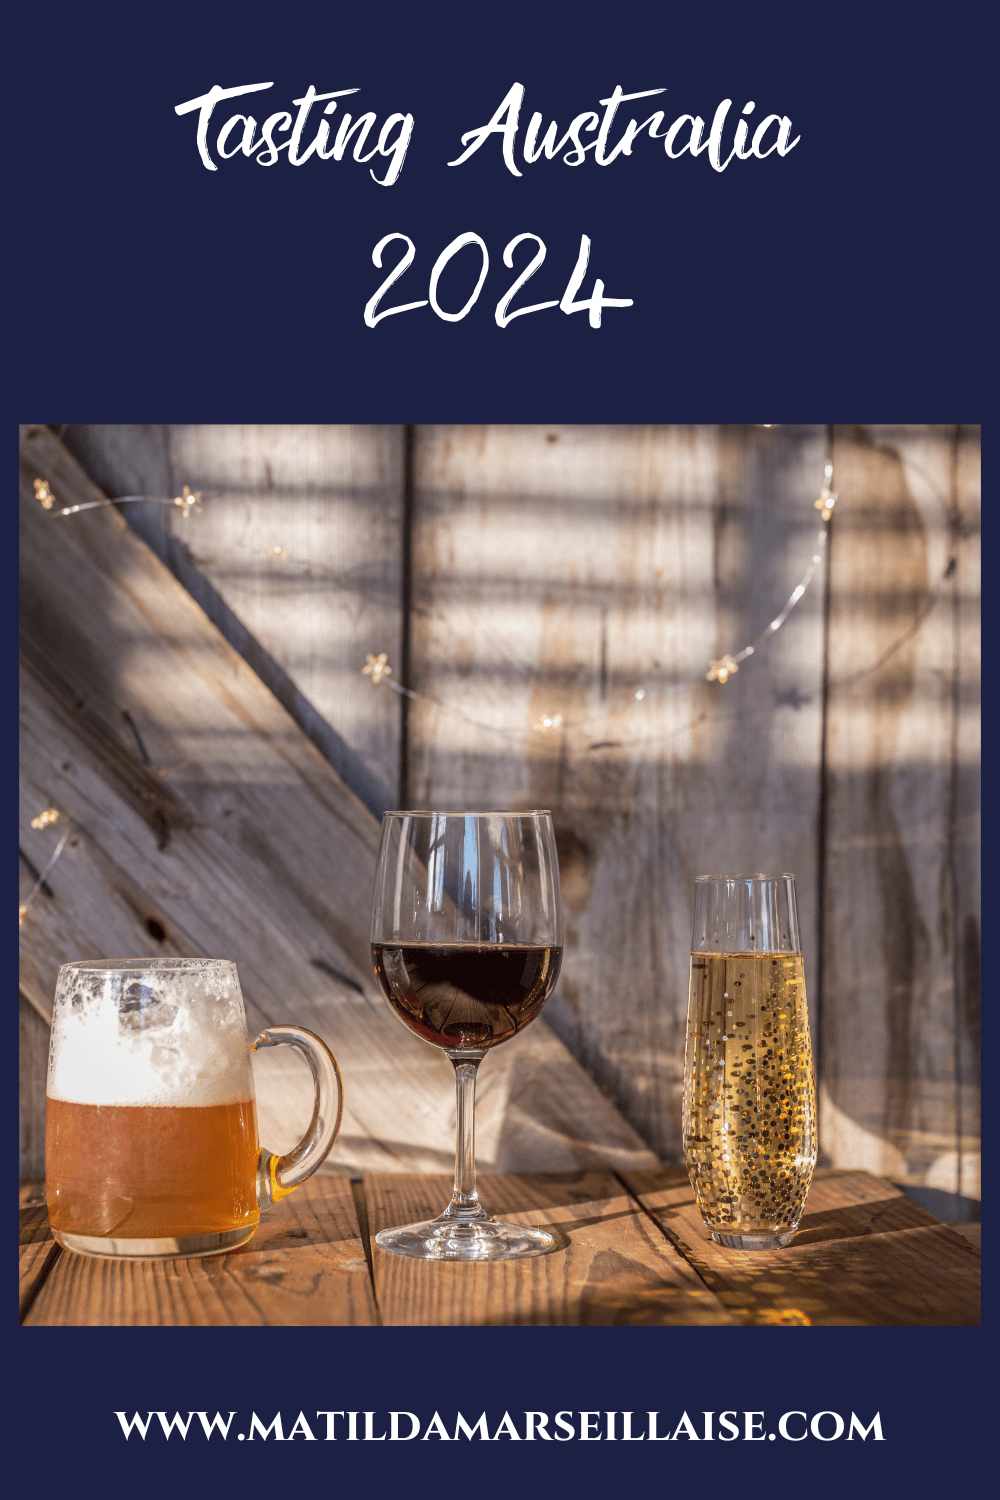 French wine, champagne and Belgian beer events at Tasting Australia 2024